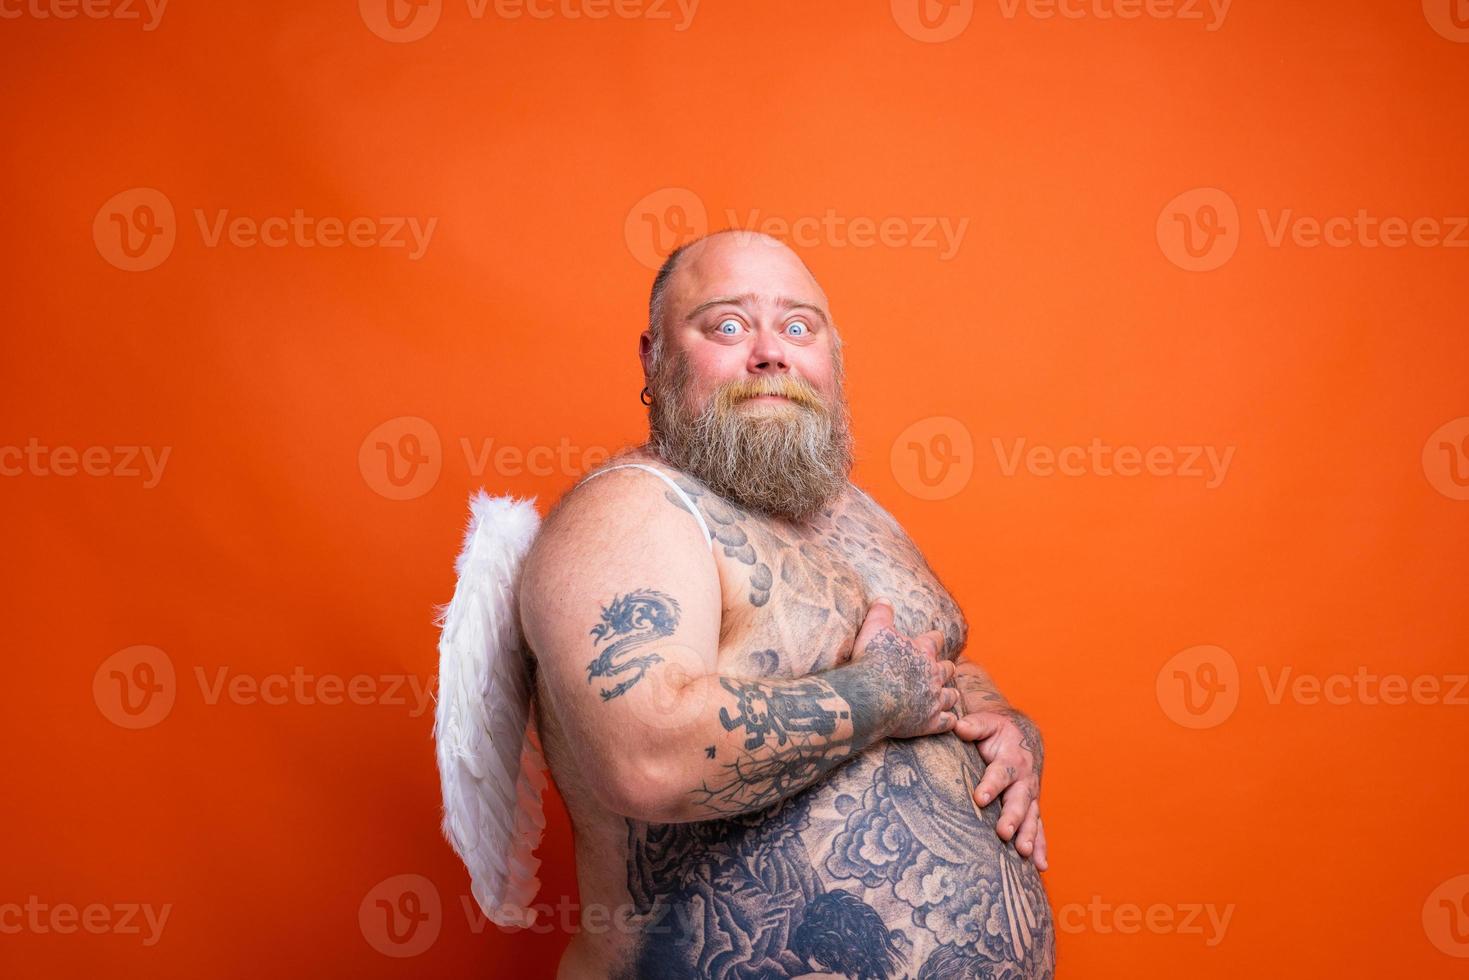 Fat afraid man with beard ,tattoos and wings acts like an angel photo